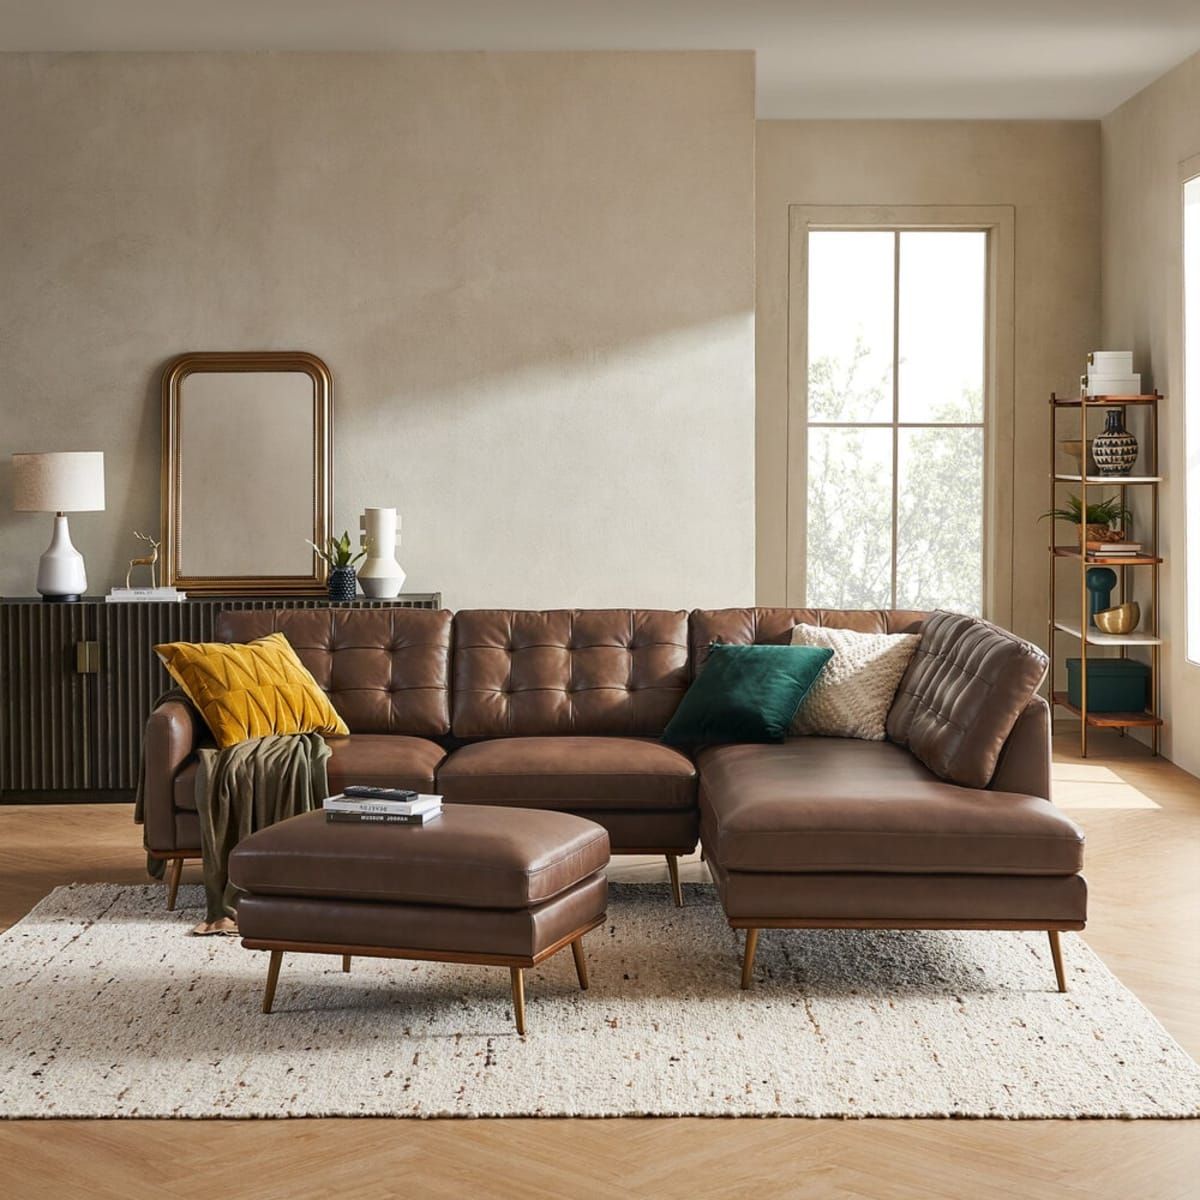 6 Colors That Go With Brown Leather Sofas | Castlery Us Within Sofas In Chocolate Brown (Photo 15 of 15)